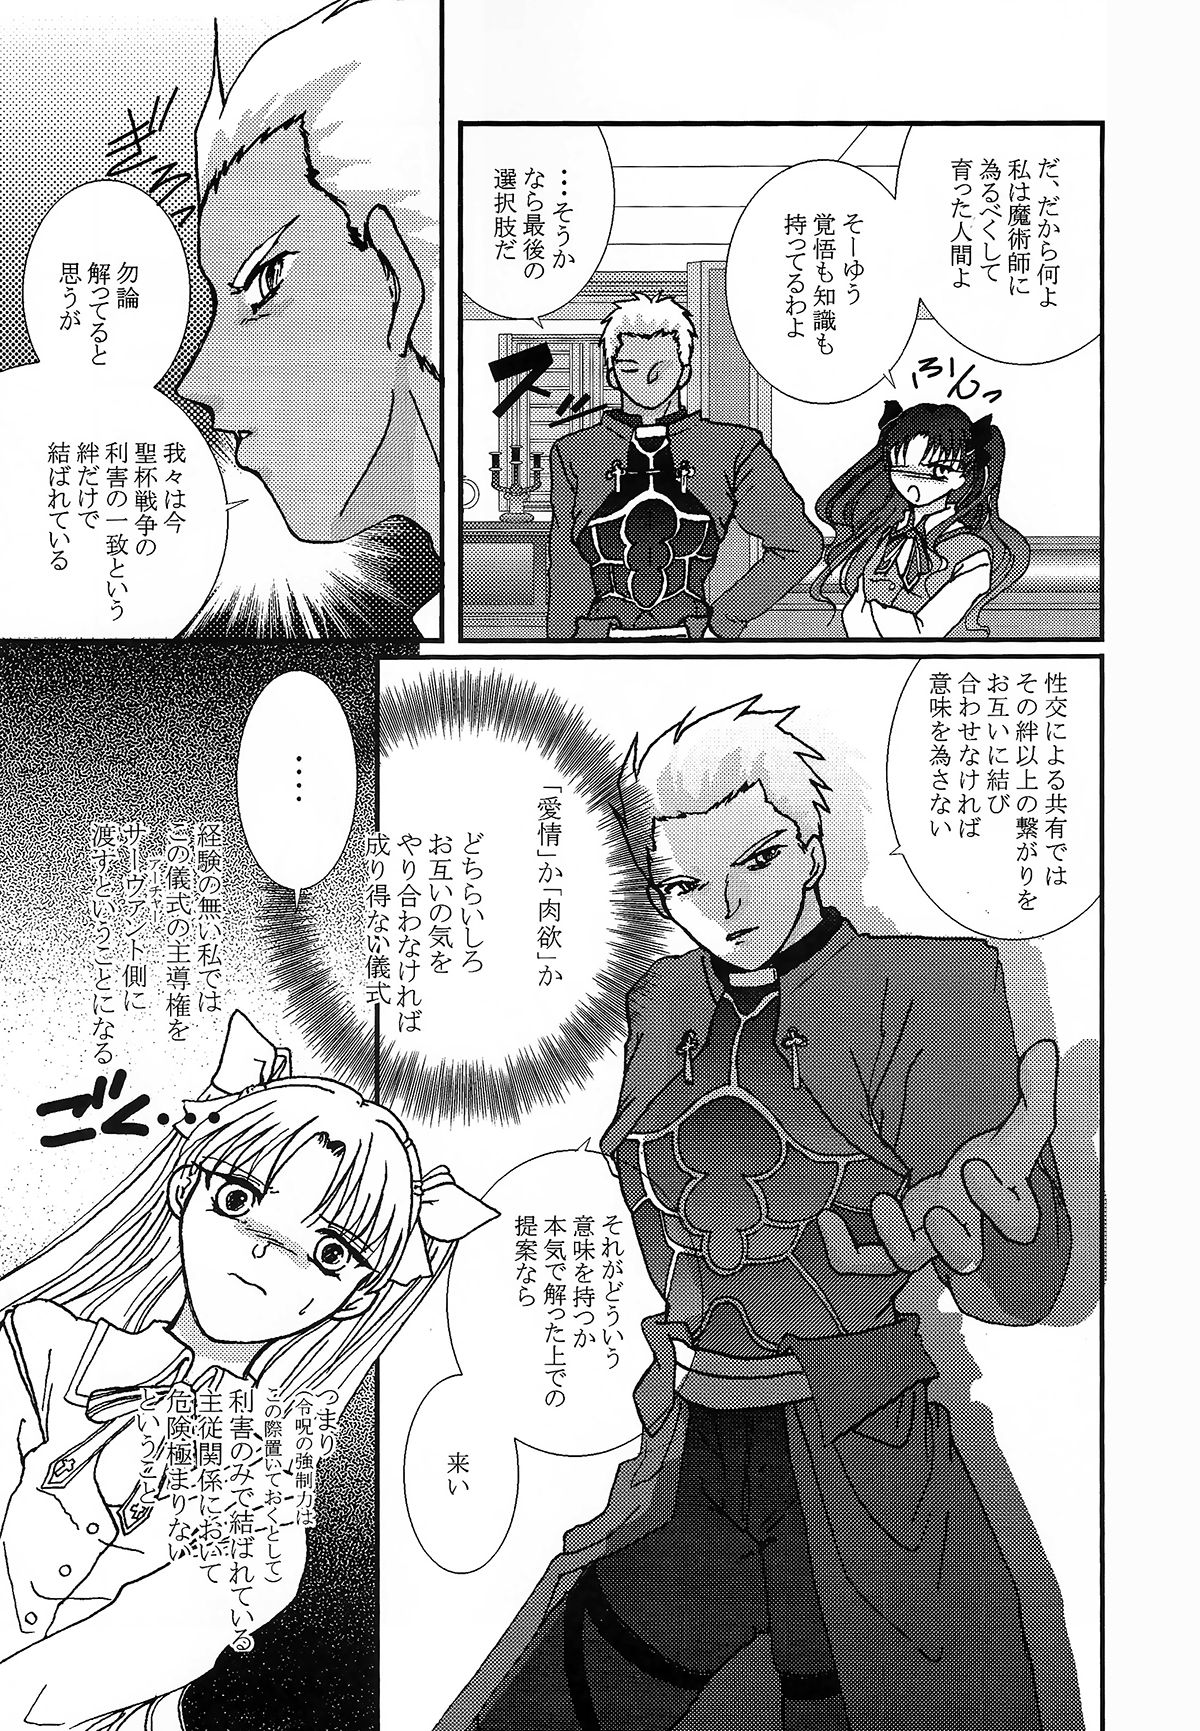 (SC24) [Takeda Syouten (Takeda Sora)] Question-7 (Fate/stay night) page 9 full